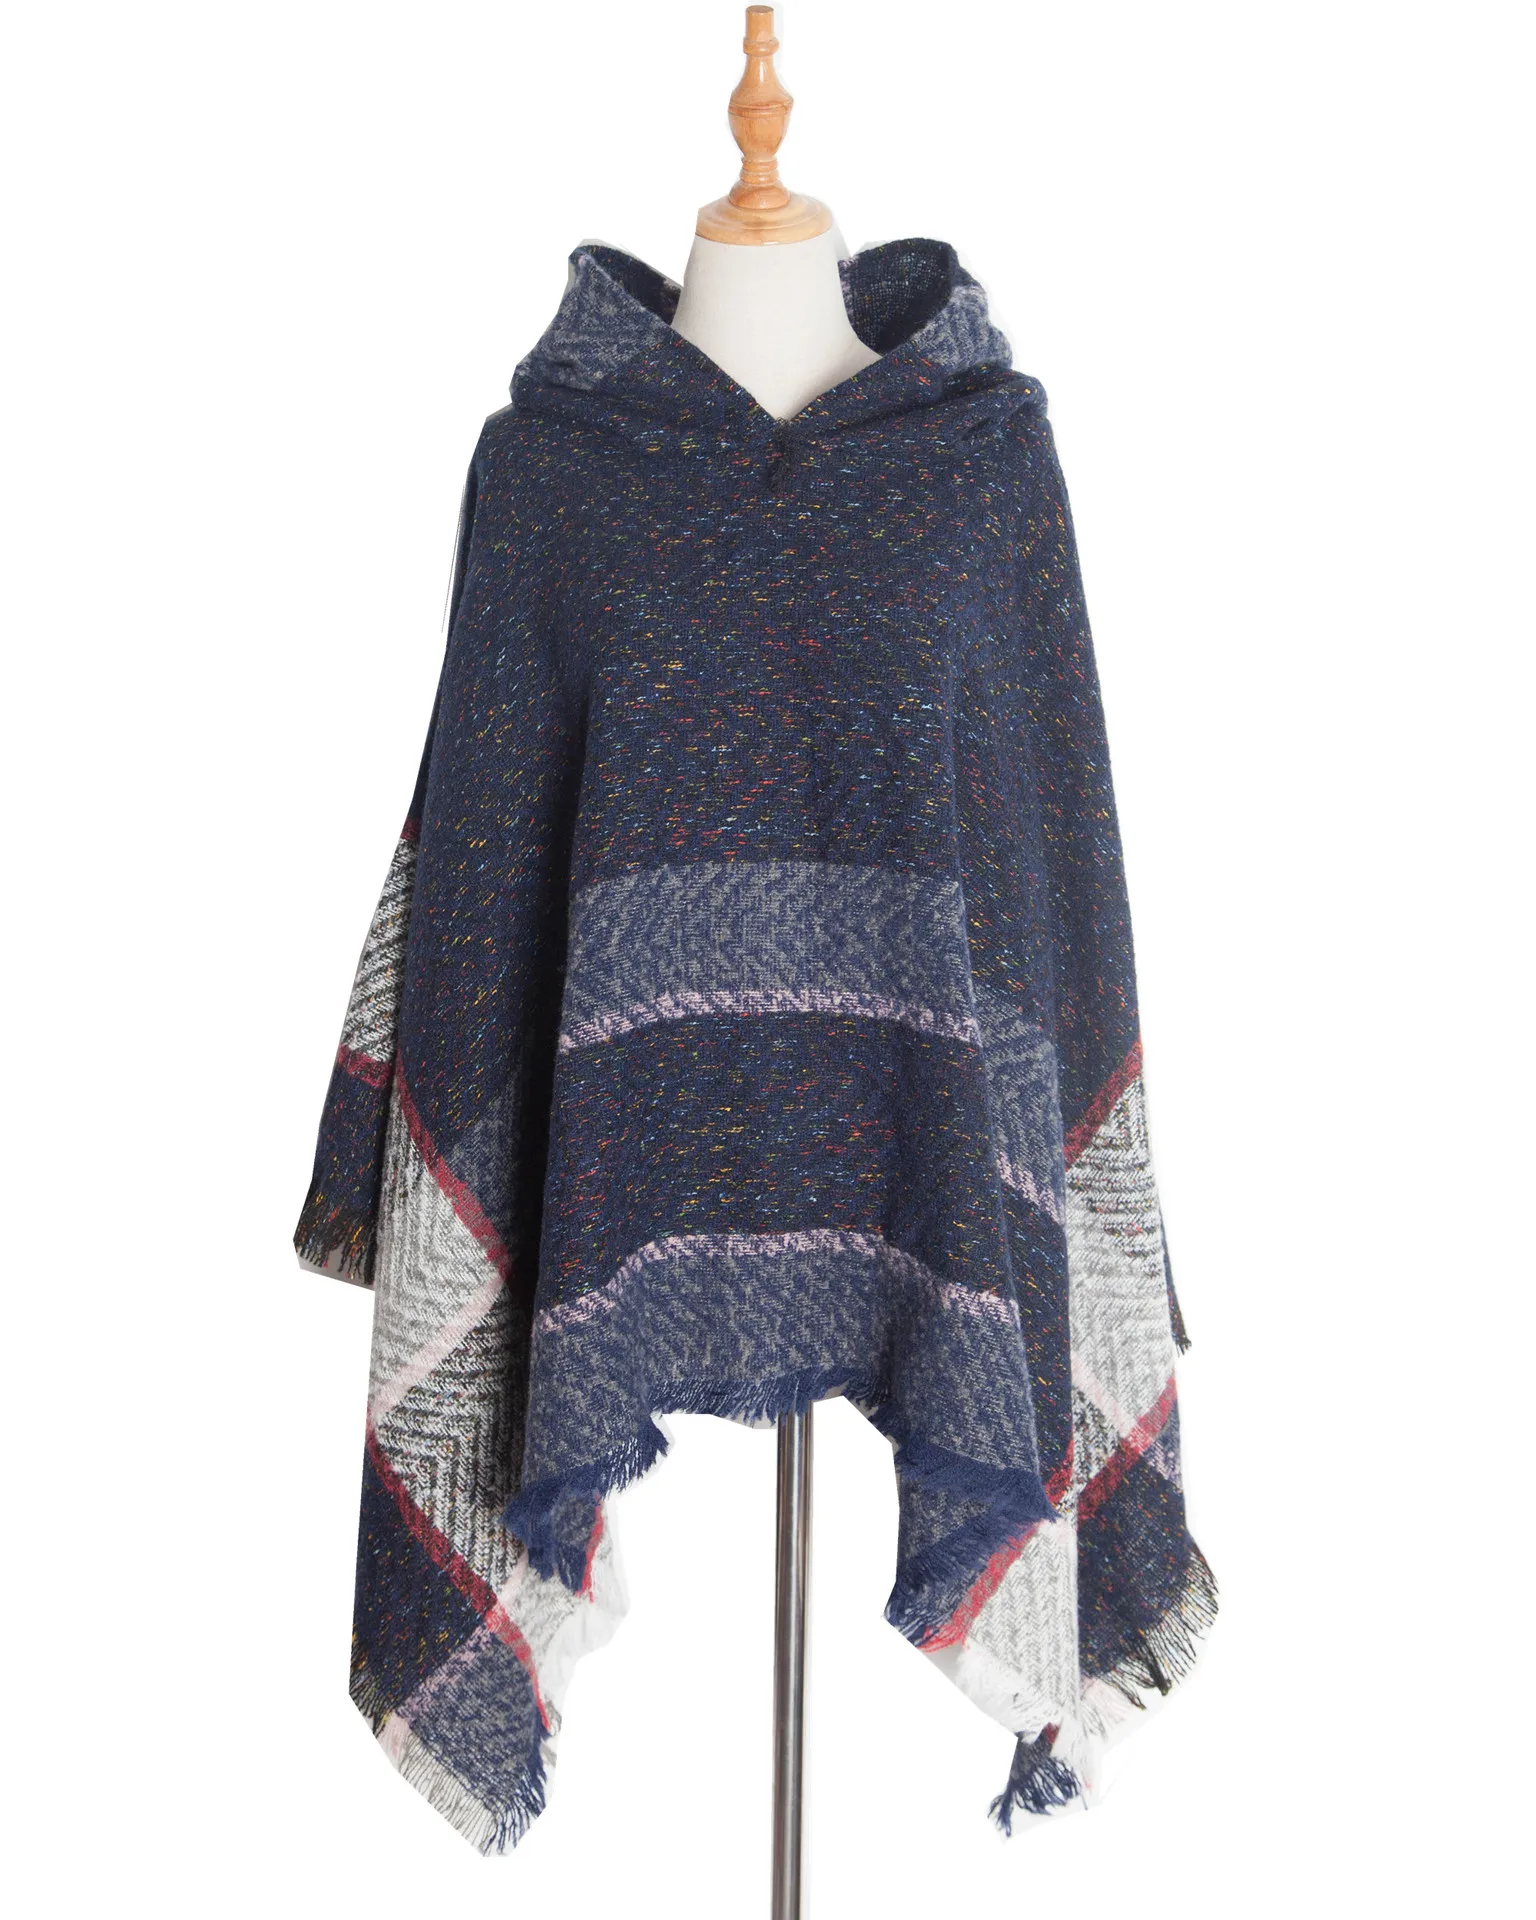 New Autumn Winter Fishbone Pattern Women's Hooded Cape Pullover Cape Women Poncho Lady Capes Navy Cloaks autumn winter new imitation otter rabbit fur collar capes pullover women knit poncho lady capes black cloak